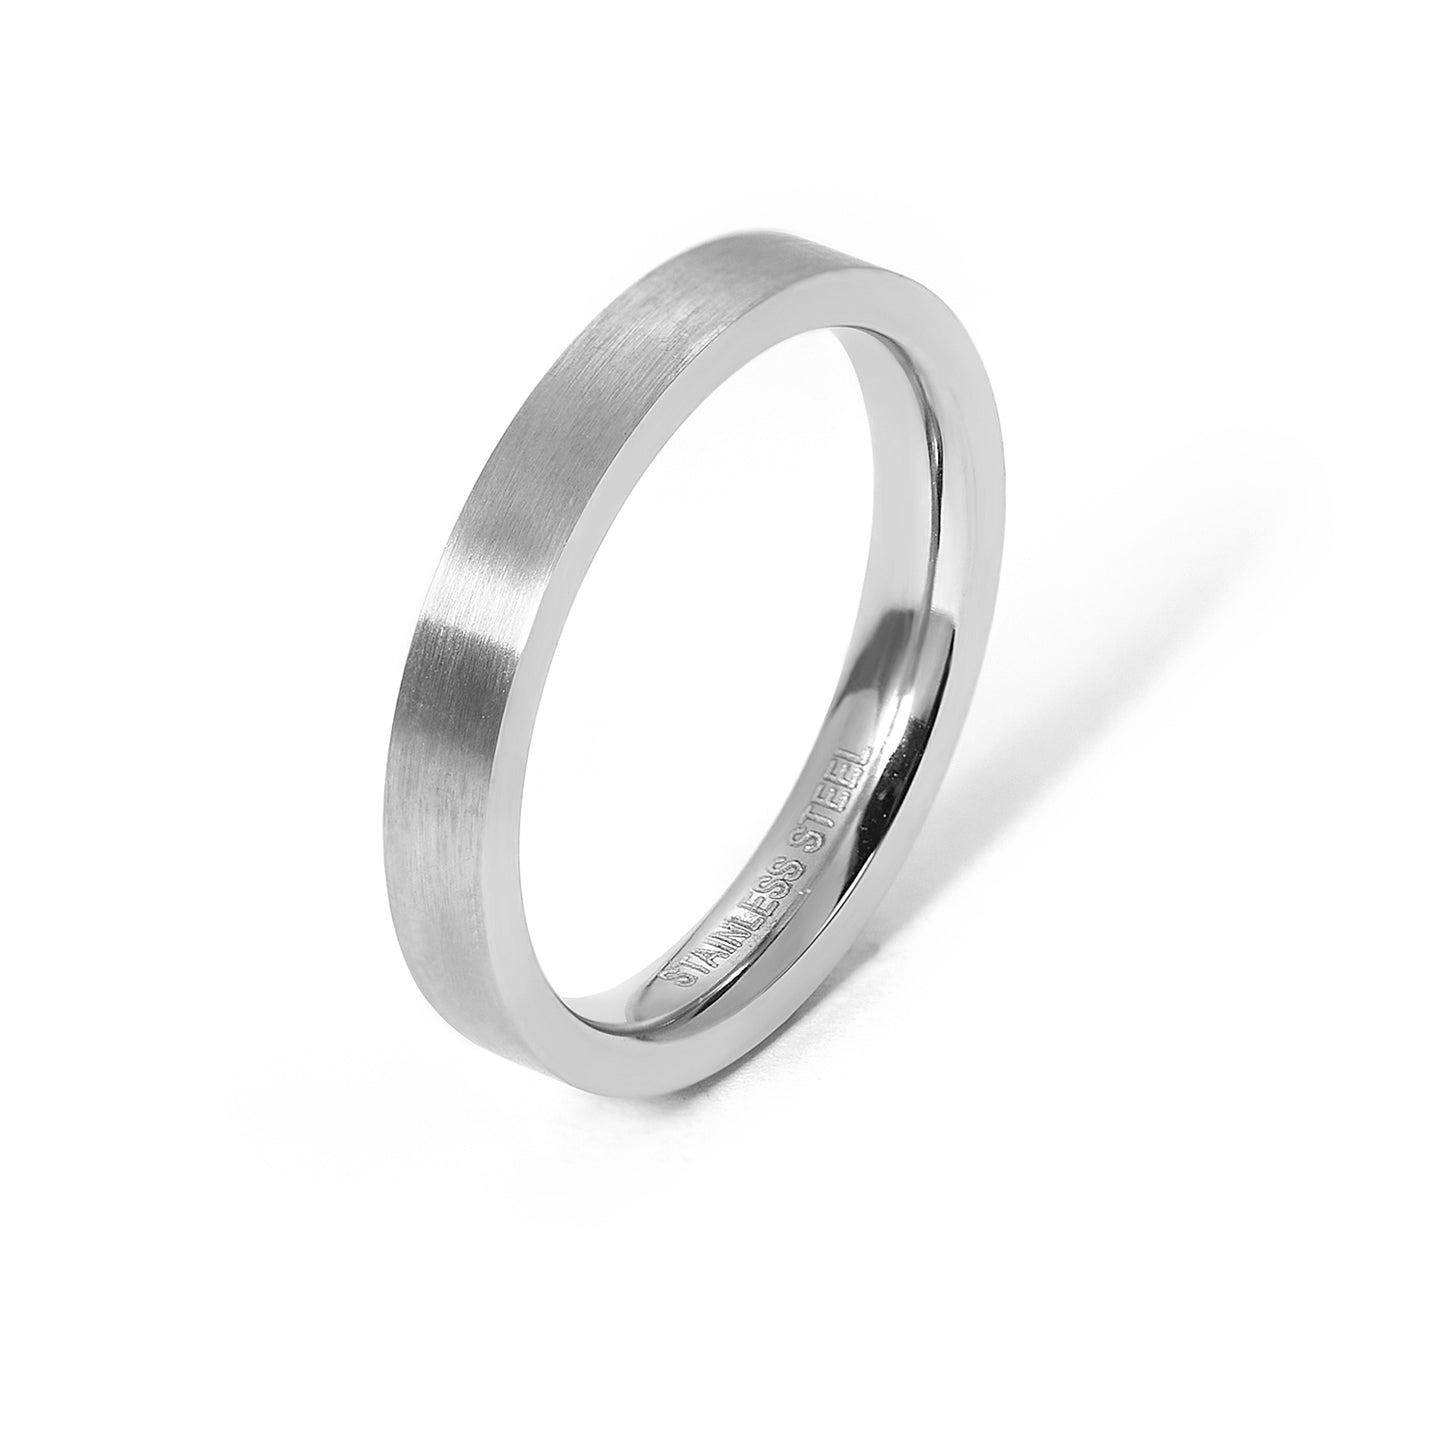 3mm Stainless Steel Plain Band Ring Free Engraving